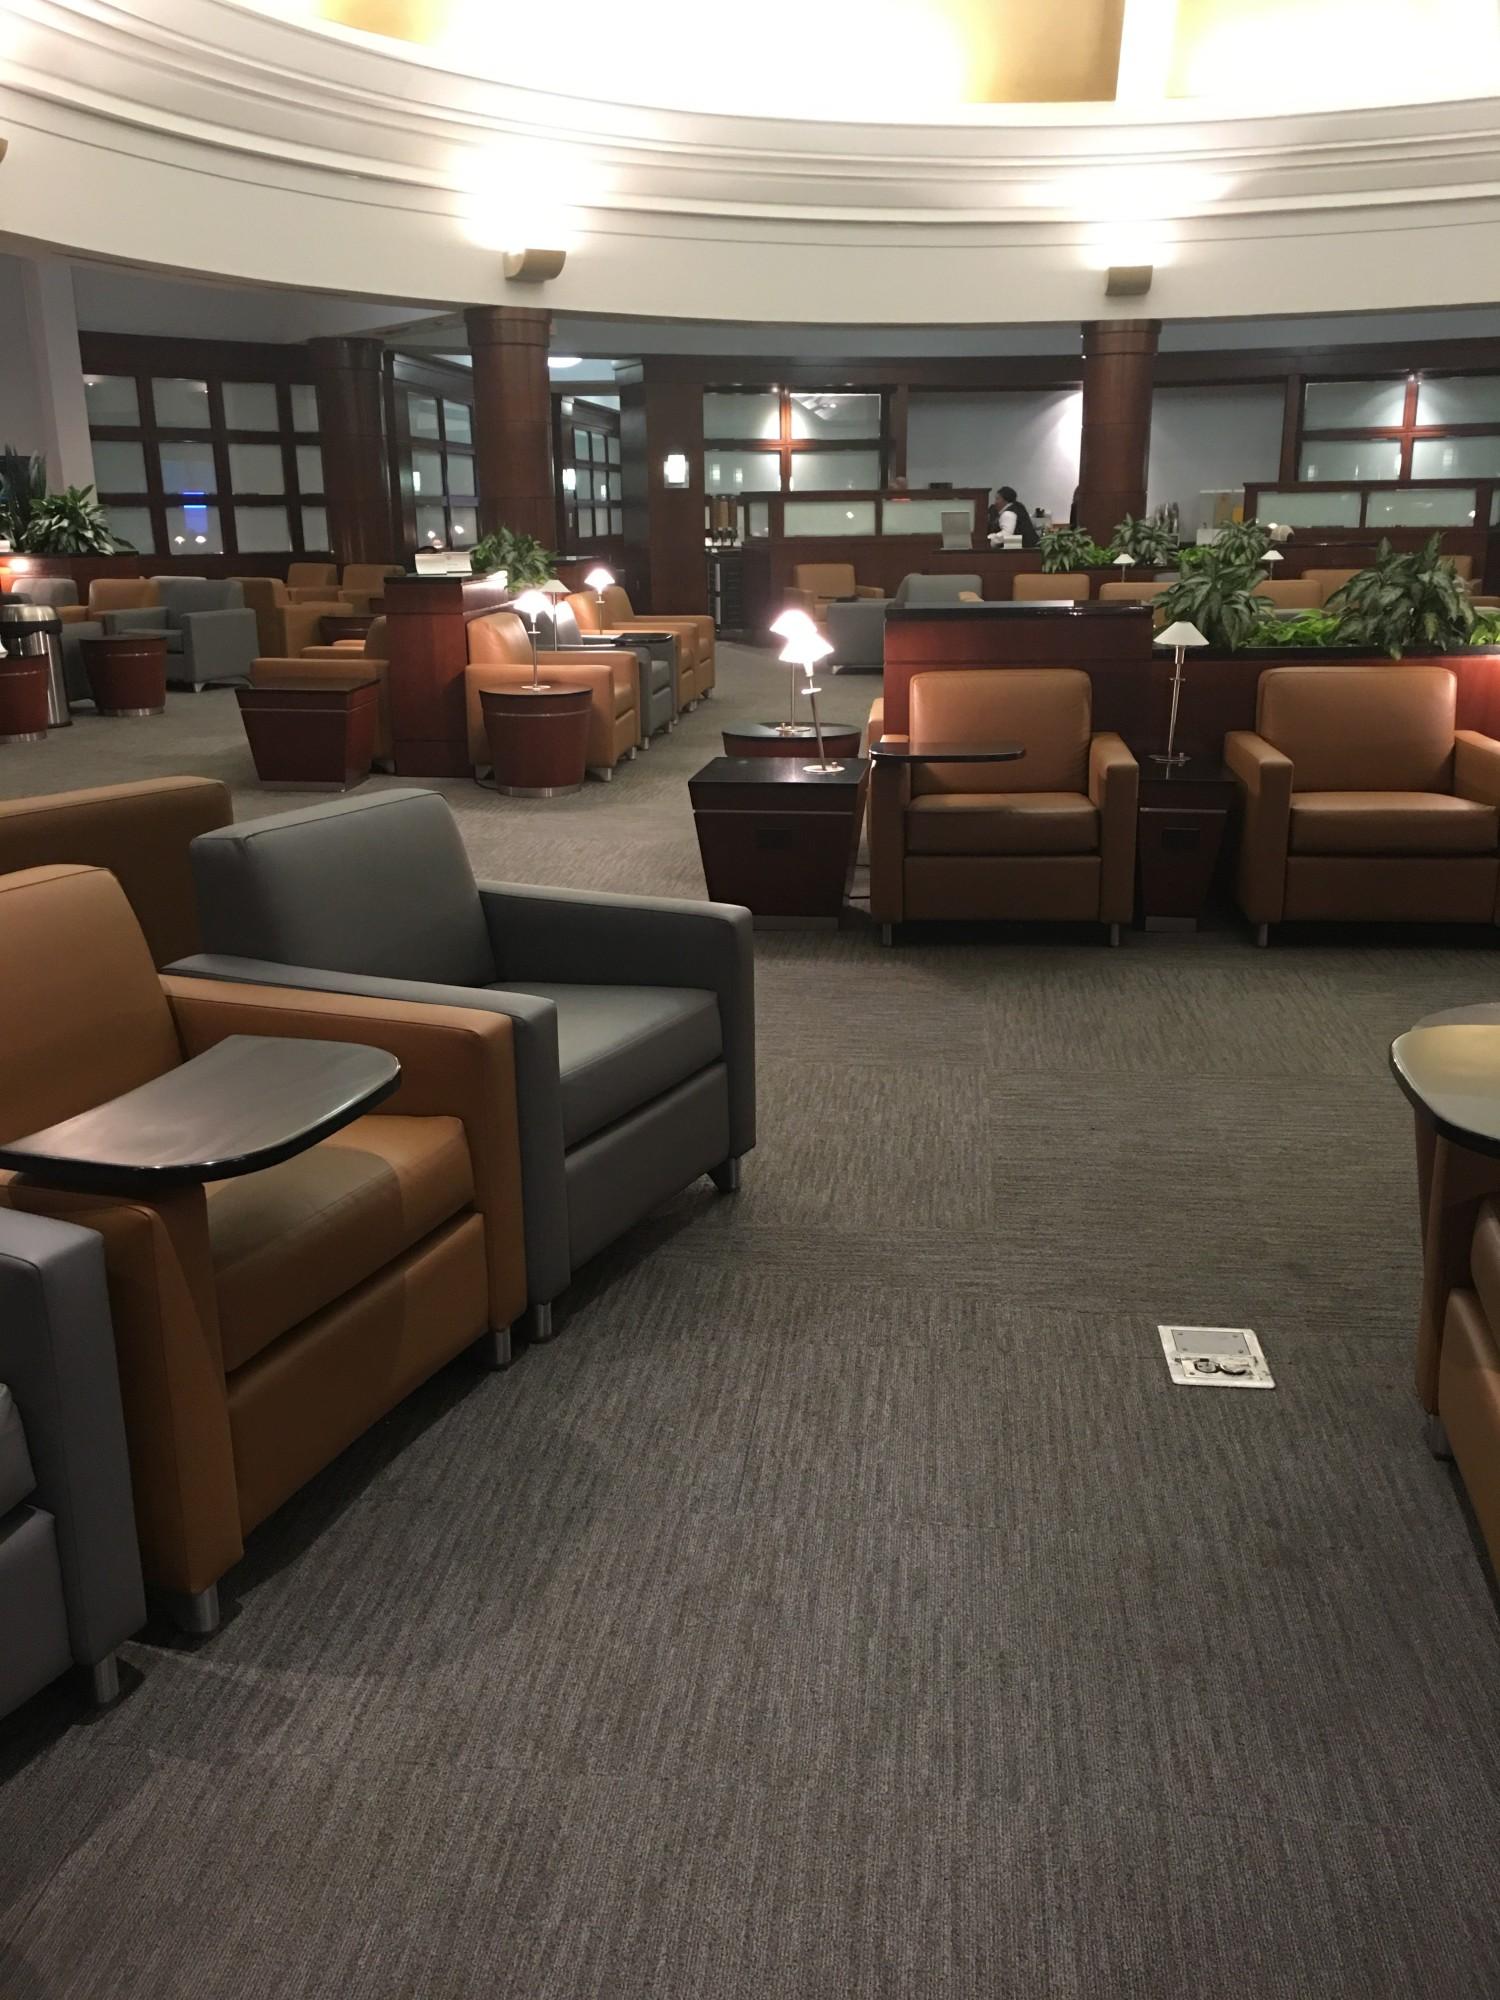 American Airlines Admirals Club image 36 of 37